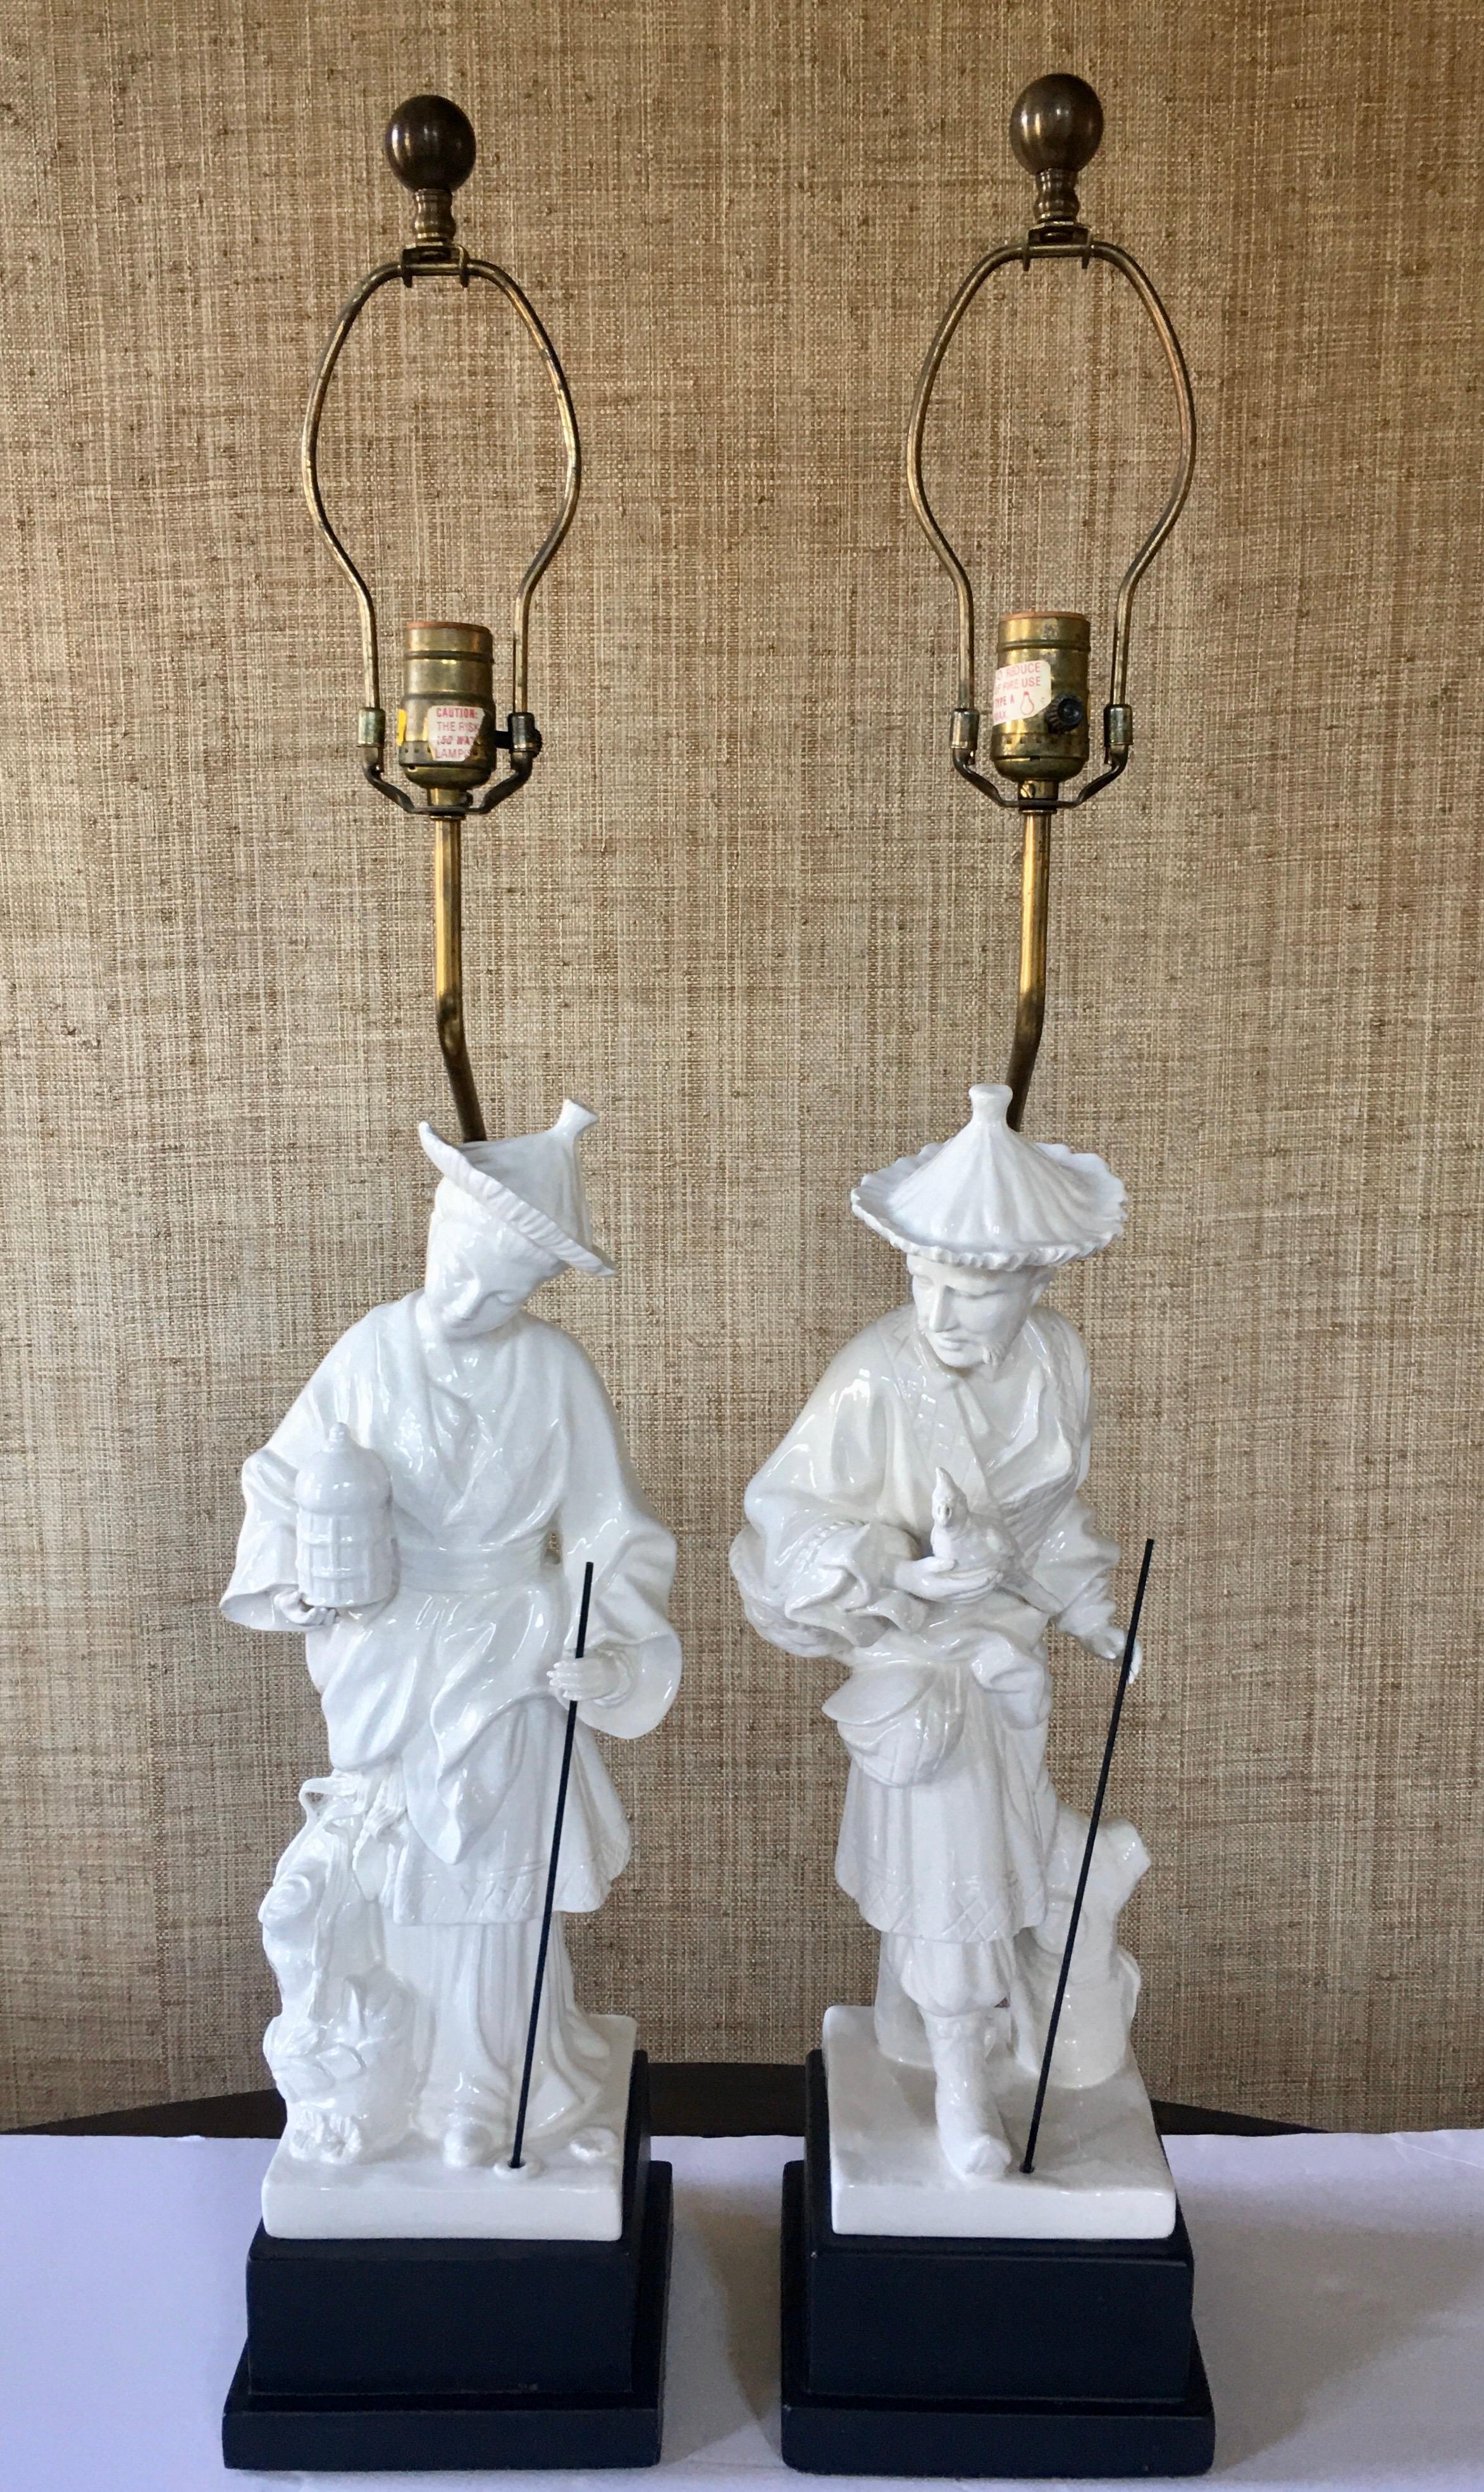 Pair of midcentury chinoiserie figural table lamps by Chapman. These beautifully detailed Hollywood Regency style lamps feature glazed cream porcelain figures mounted on black plinth bases. Lamp shades not included.

Measures: Lamp height to